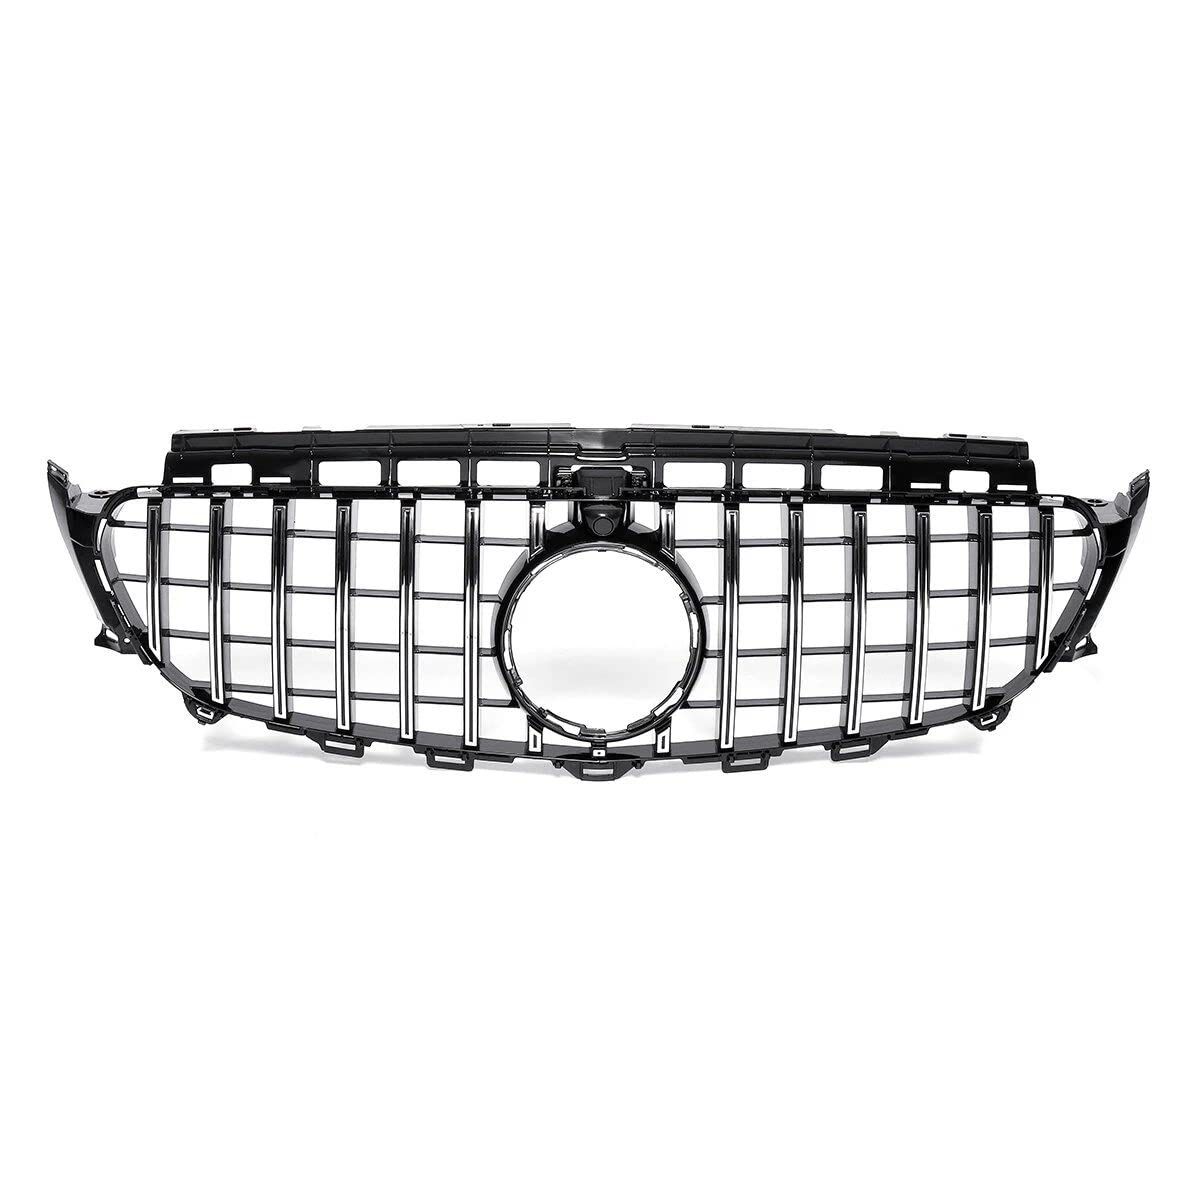 FANCHANTS GT R Style Silver Black Front Radiator Grille For 2016 2017 2018 2019 2020 Mercedes Benz E